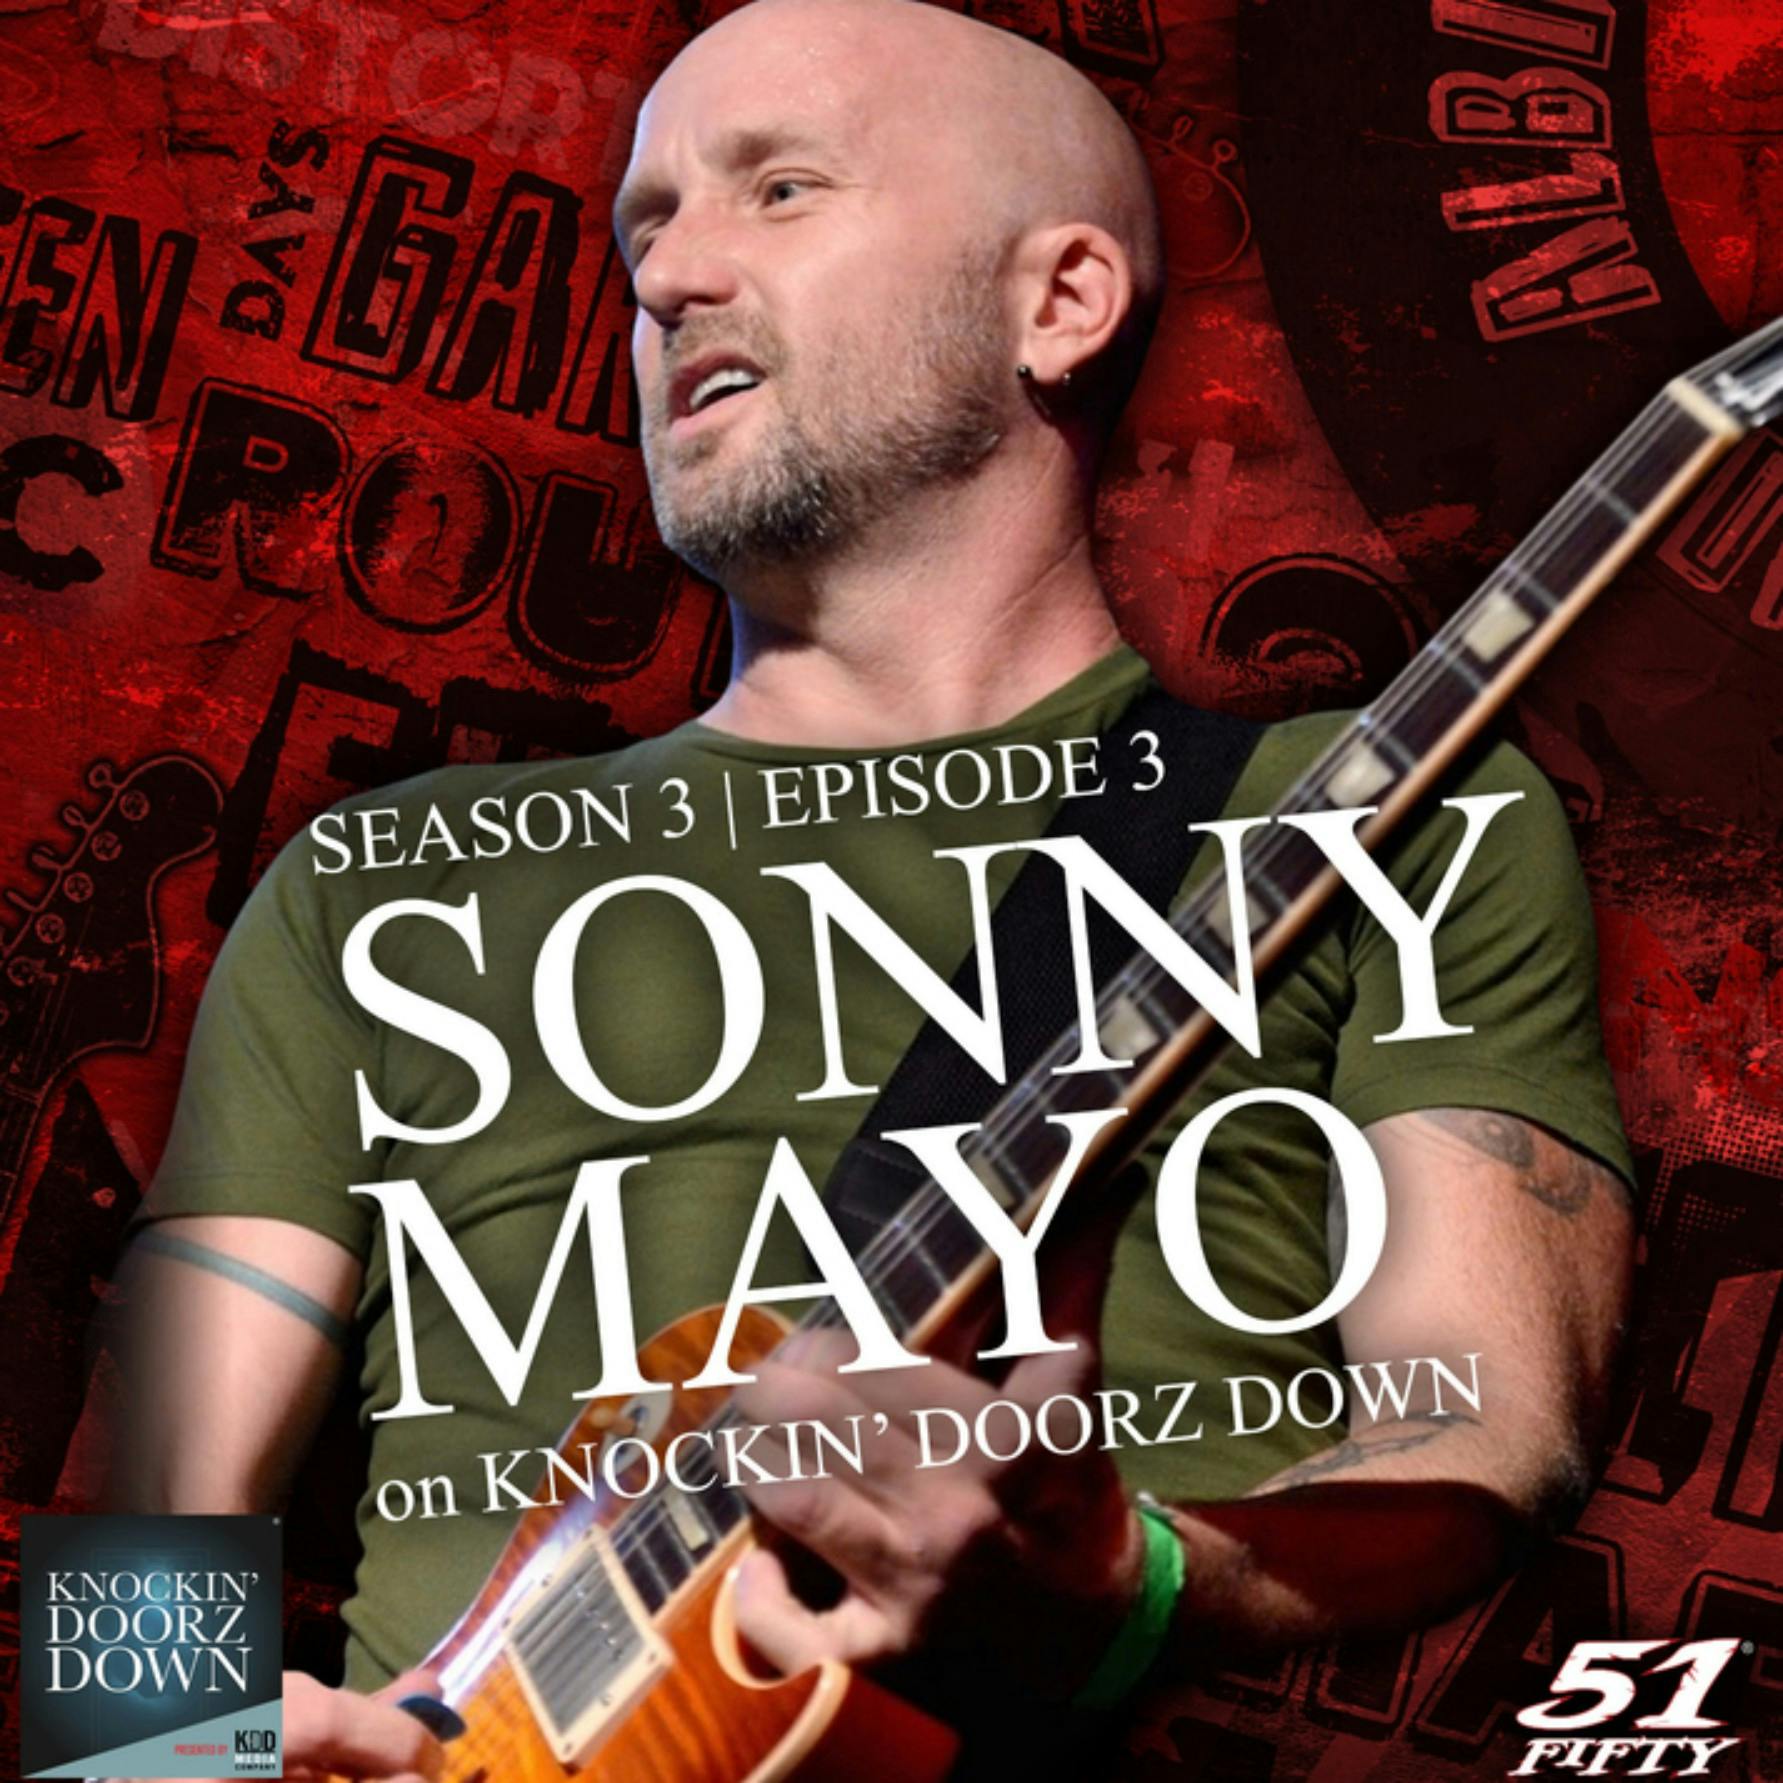 Sonny Mayo | Part 1, Crystal Meth, Recovery Advocate, Thrash Metal Pioneer, Sevendust, Snot & Rock to Recovery